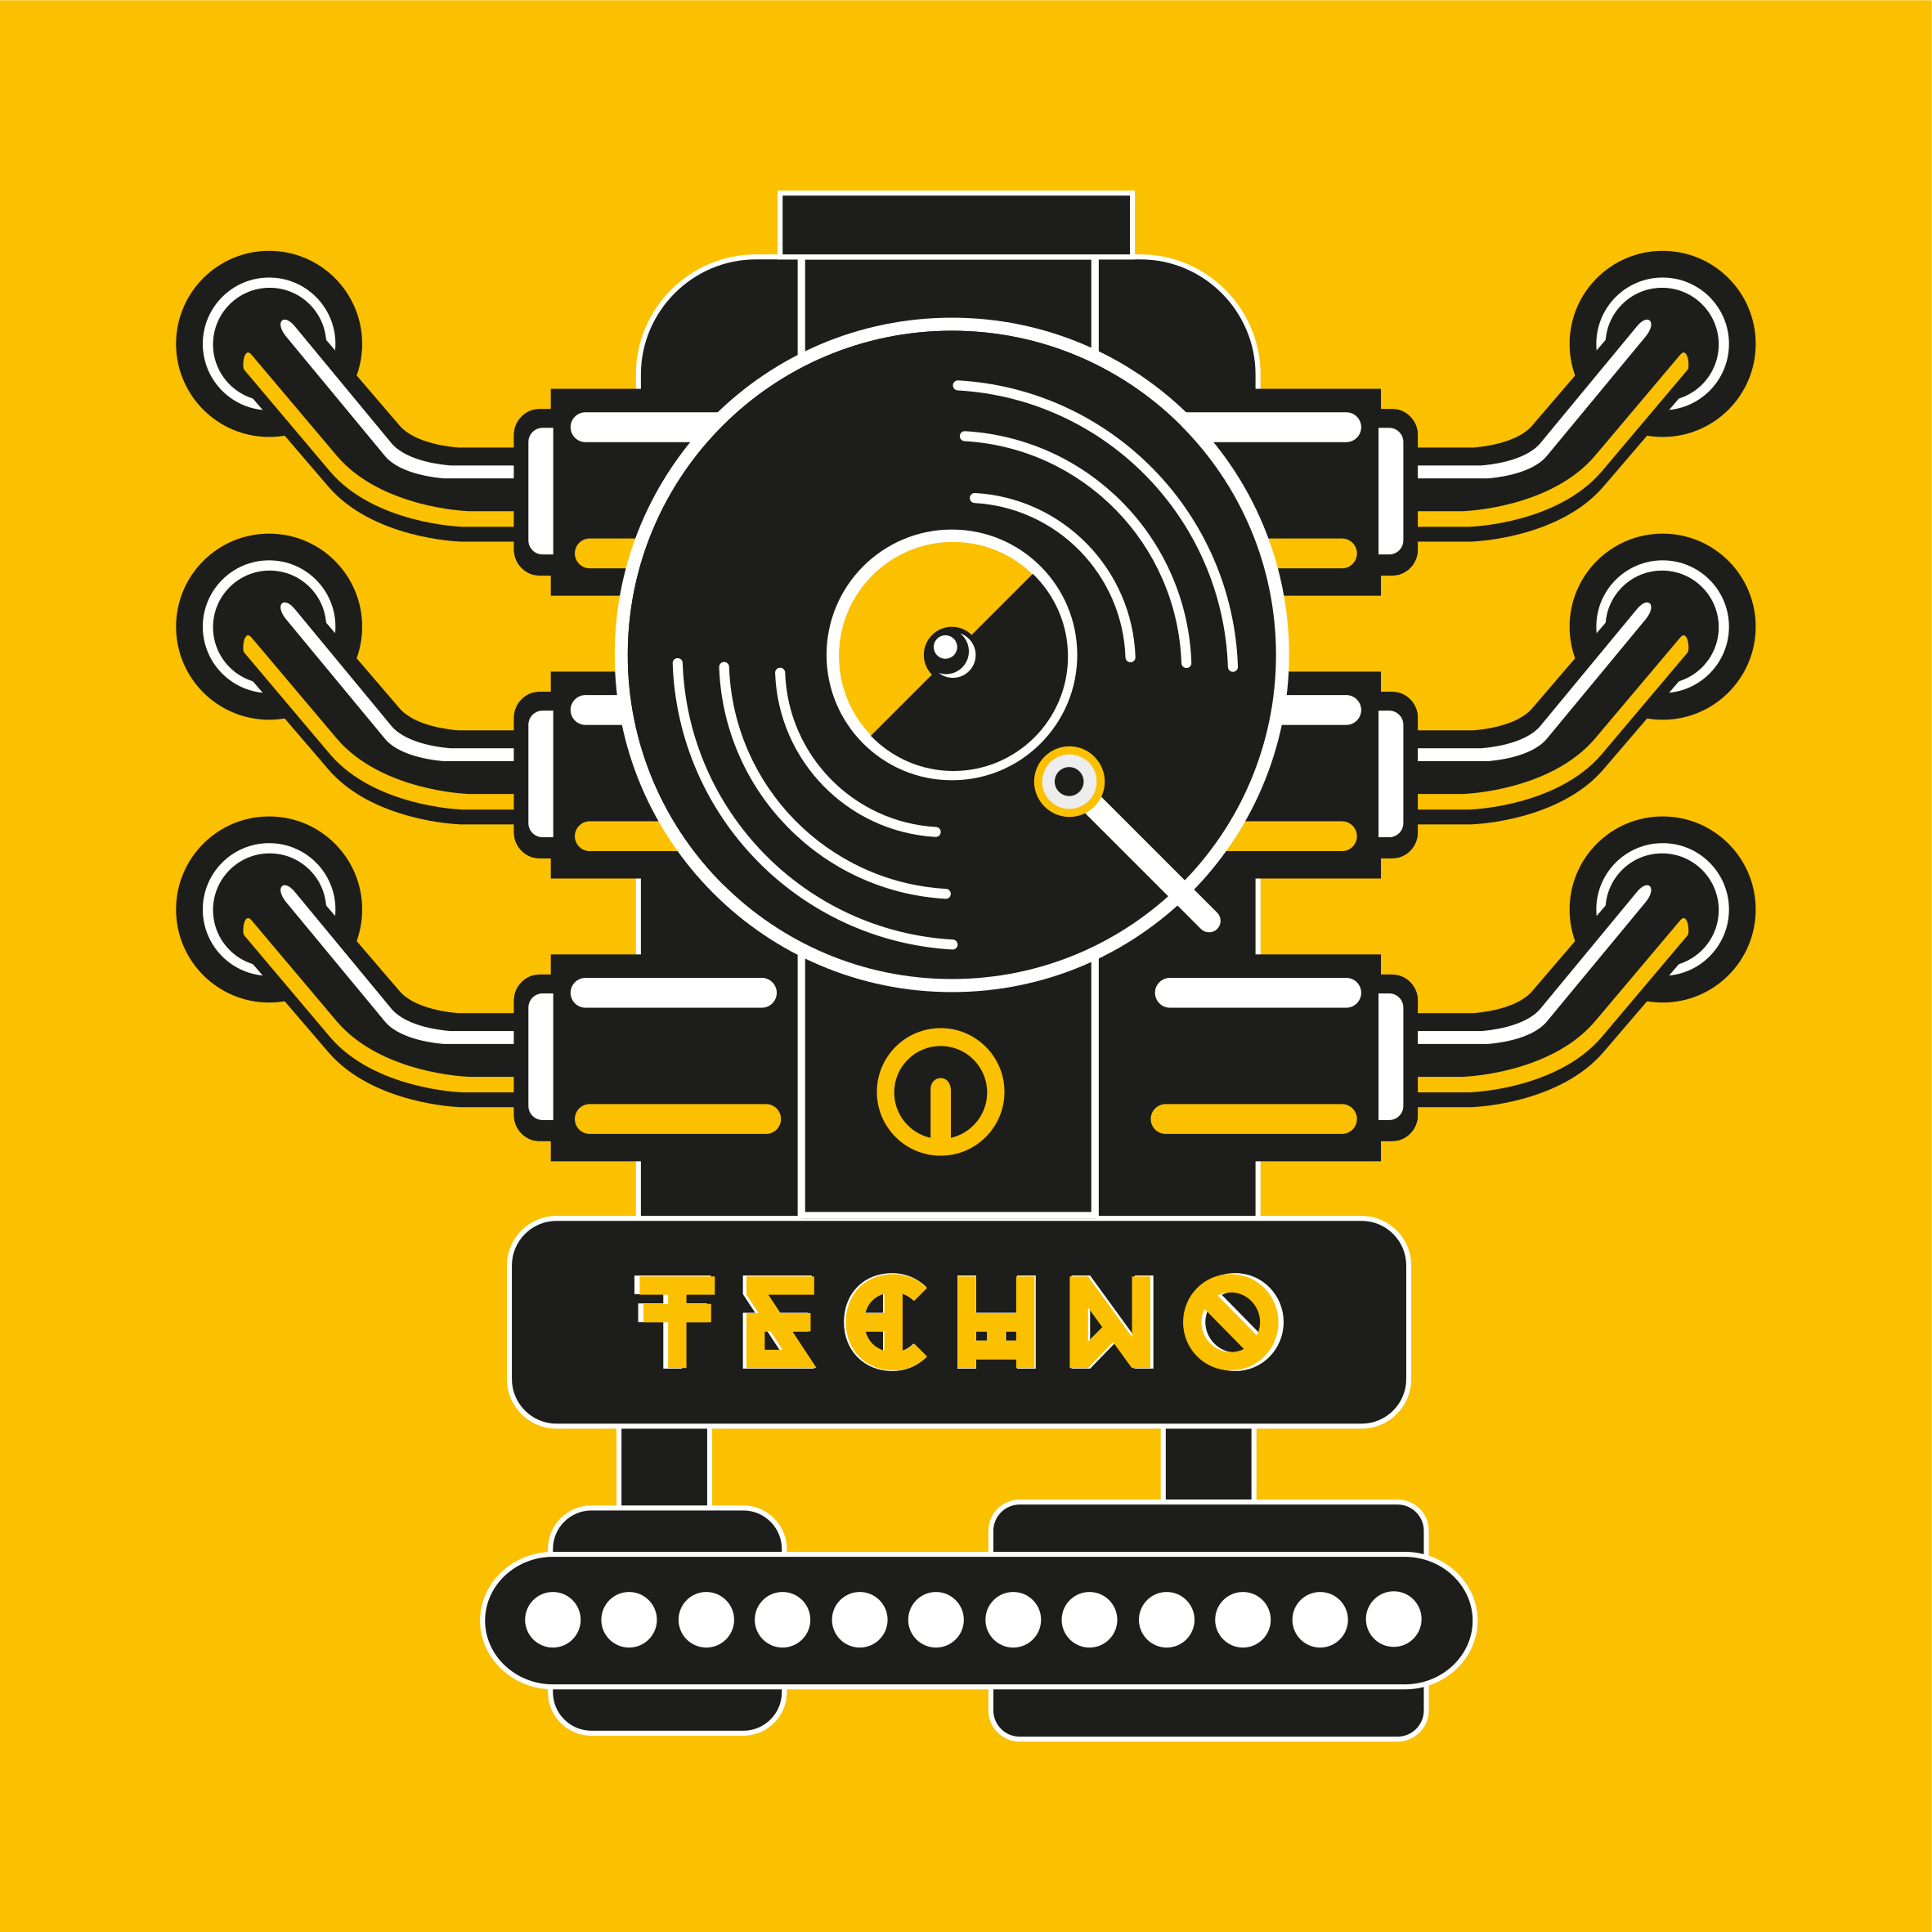 Techno and industrial party poster, with a vinyl record and car engine